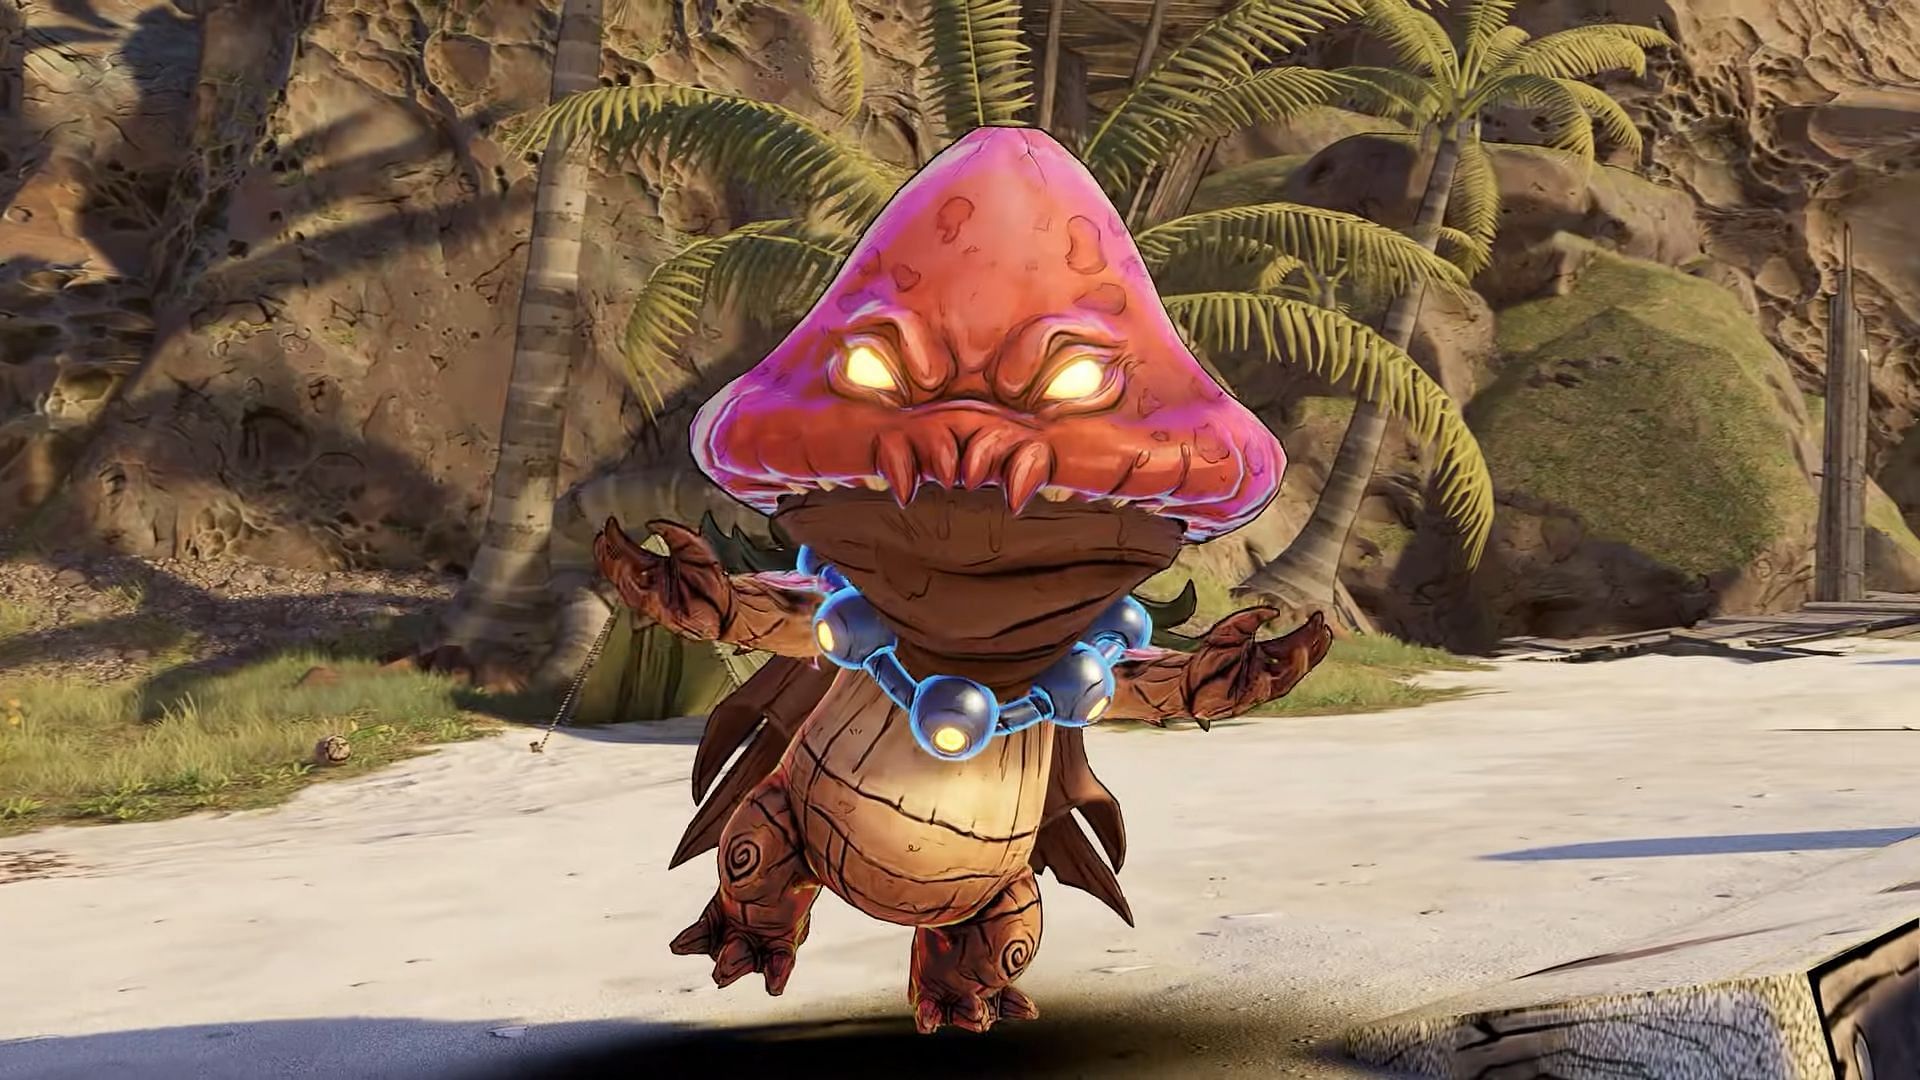 The Mushroom companion can target enemies (Image via Gearbox Software)